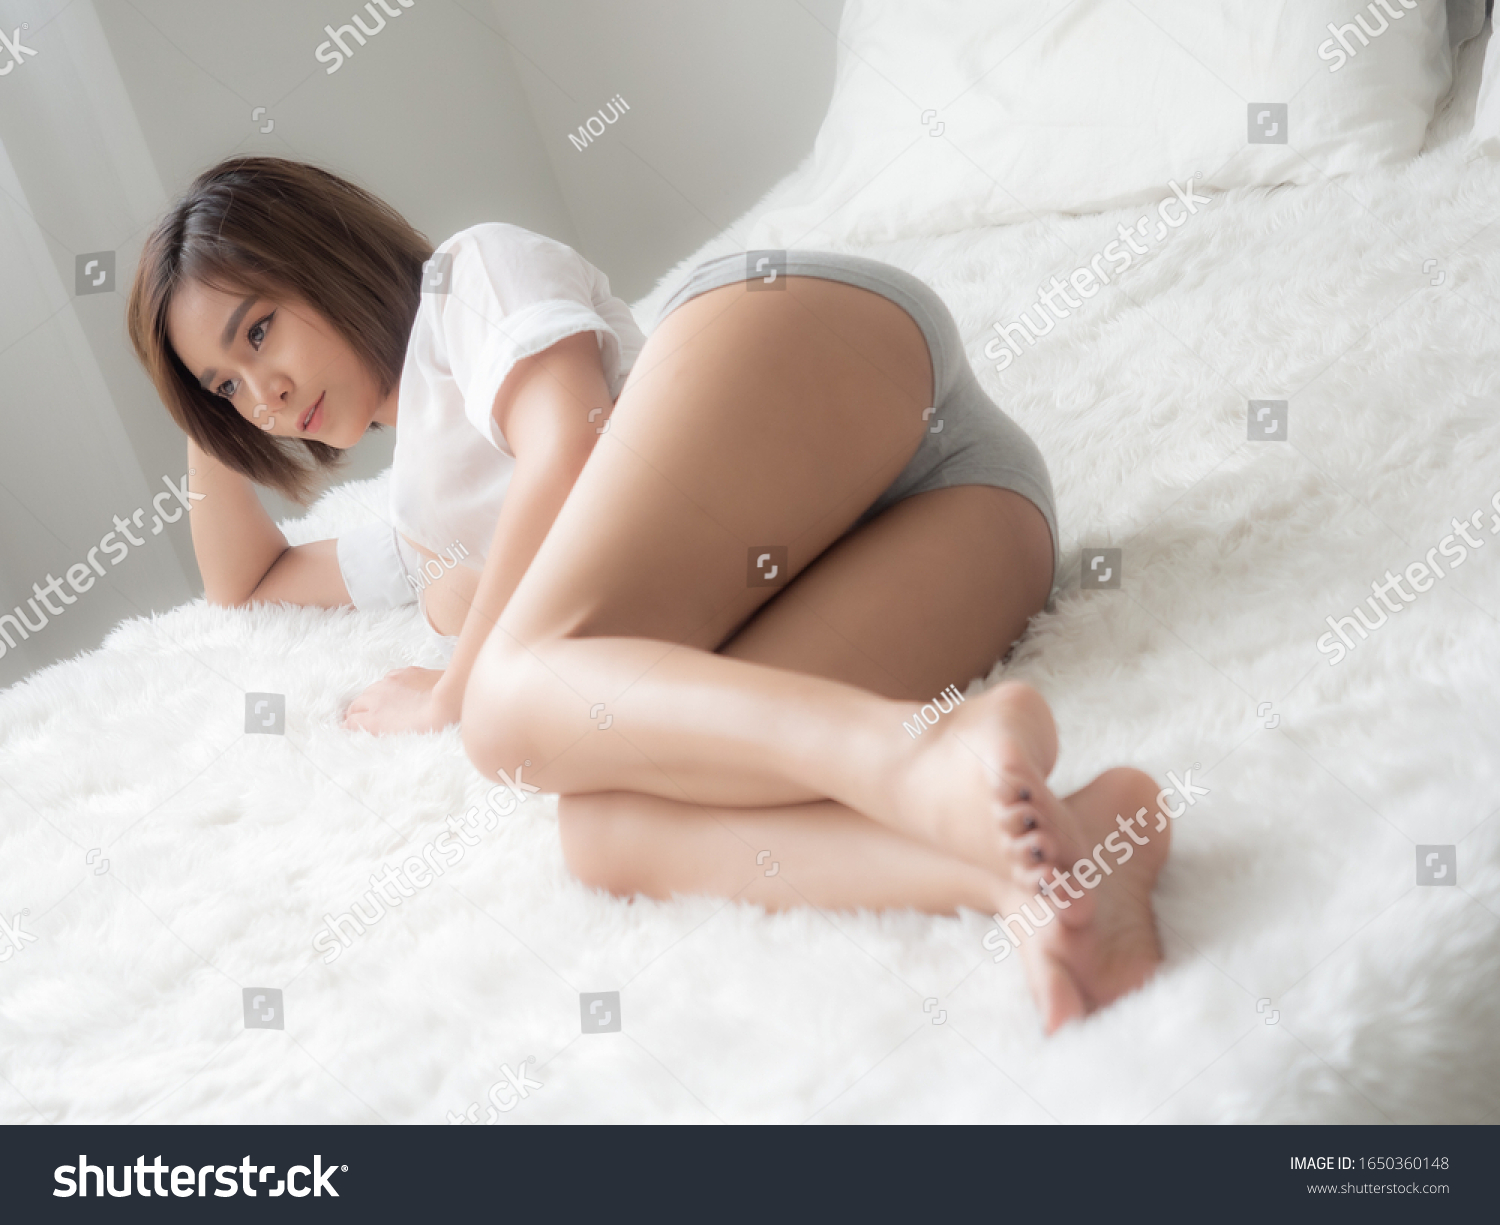 Sexy Asian Woman Lying On Bed Stock Photo Shutterstock